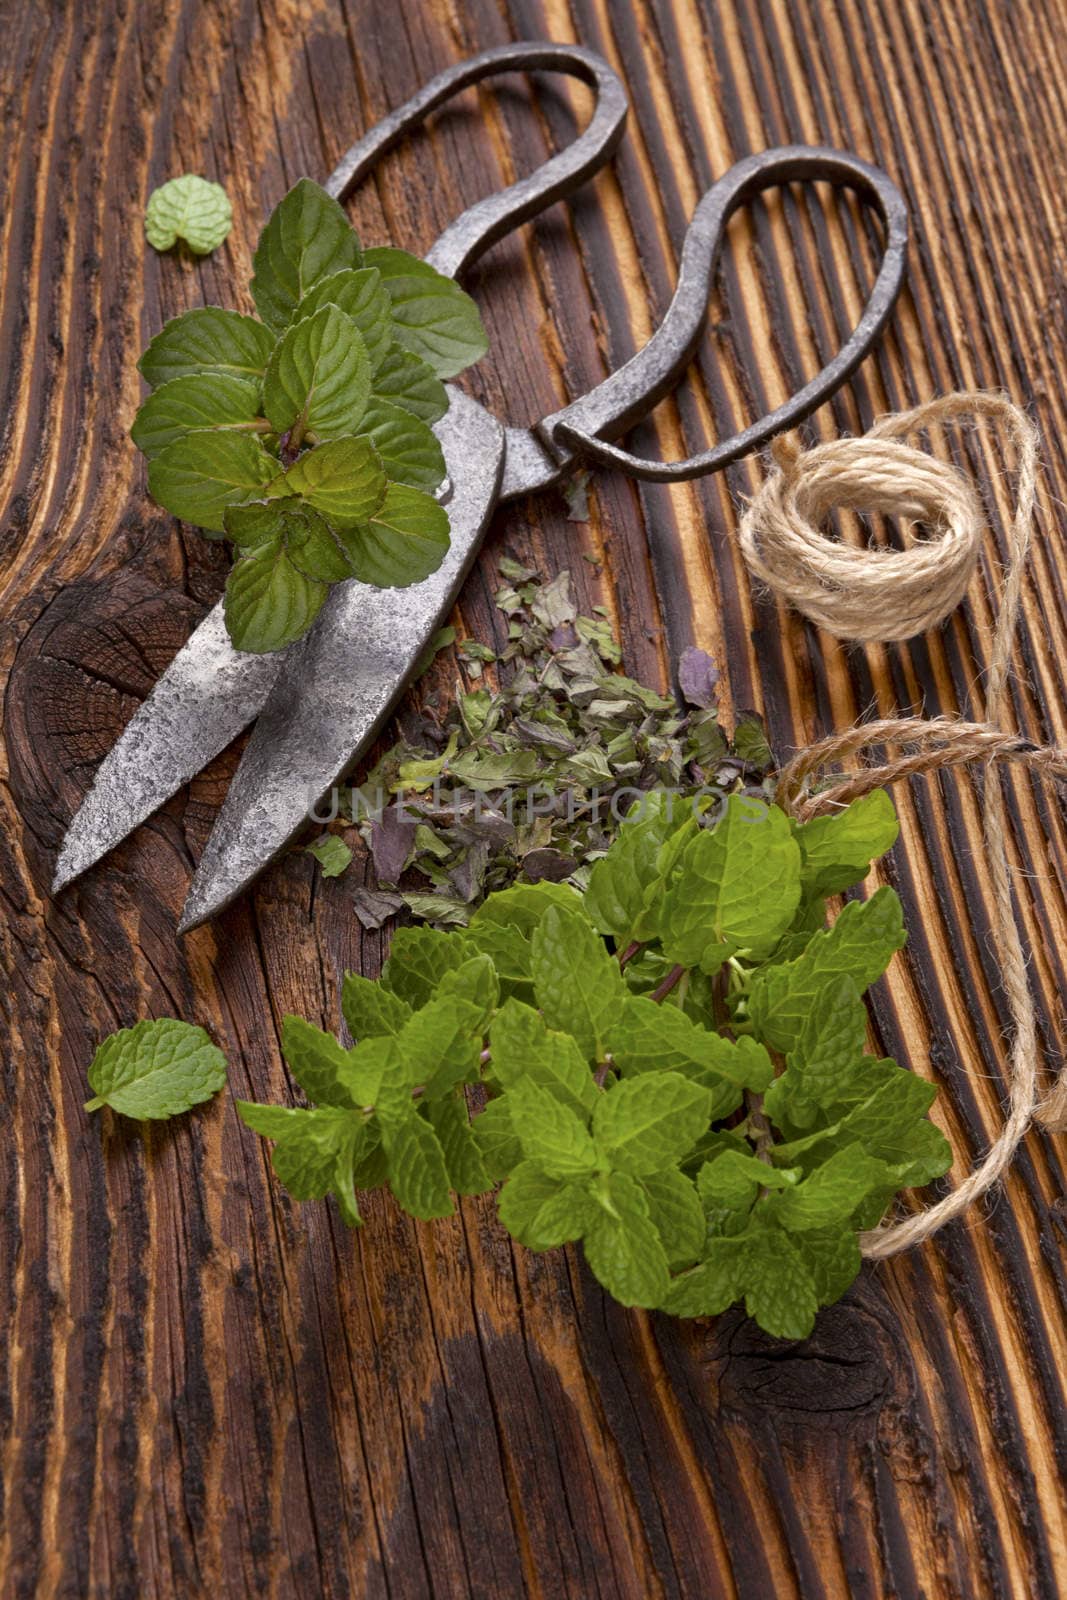 Mint. Aromatic culinary herbs, fresh and dry mint herb on wooden rustic background with old vintage scissors.